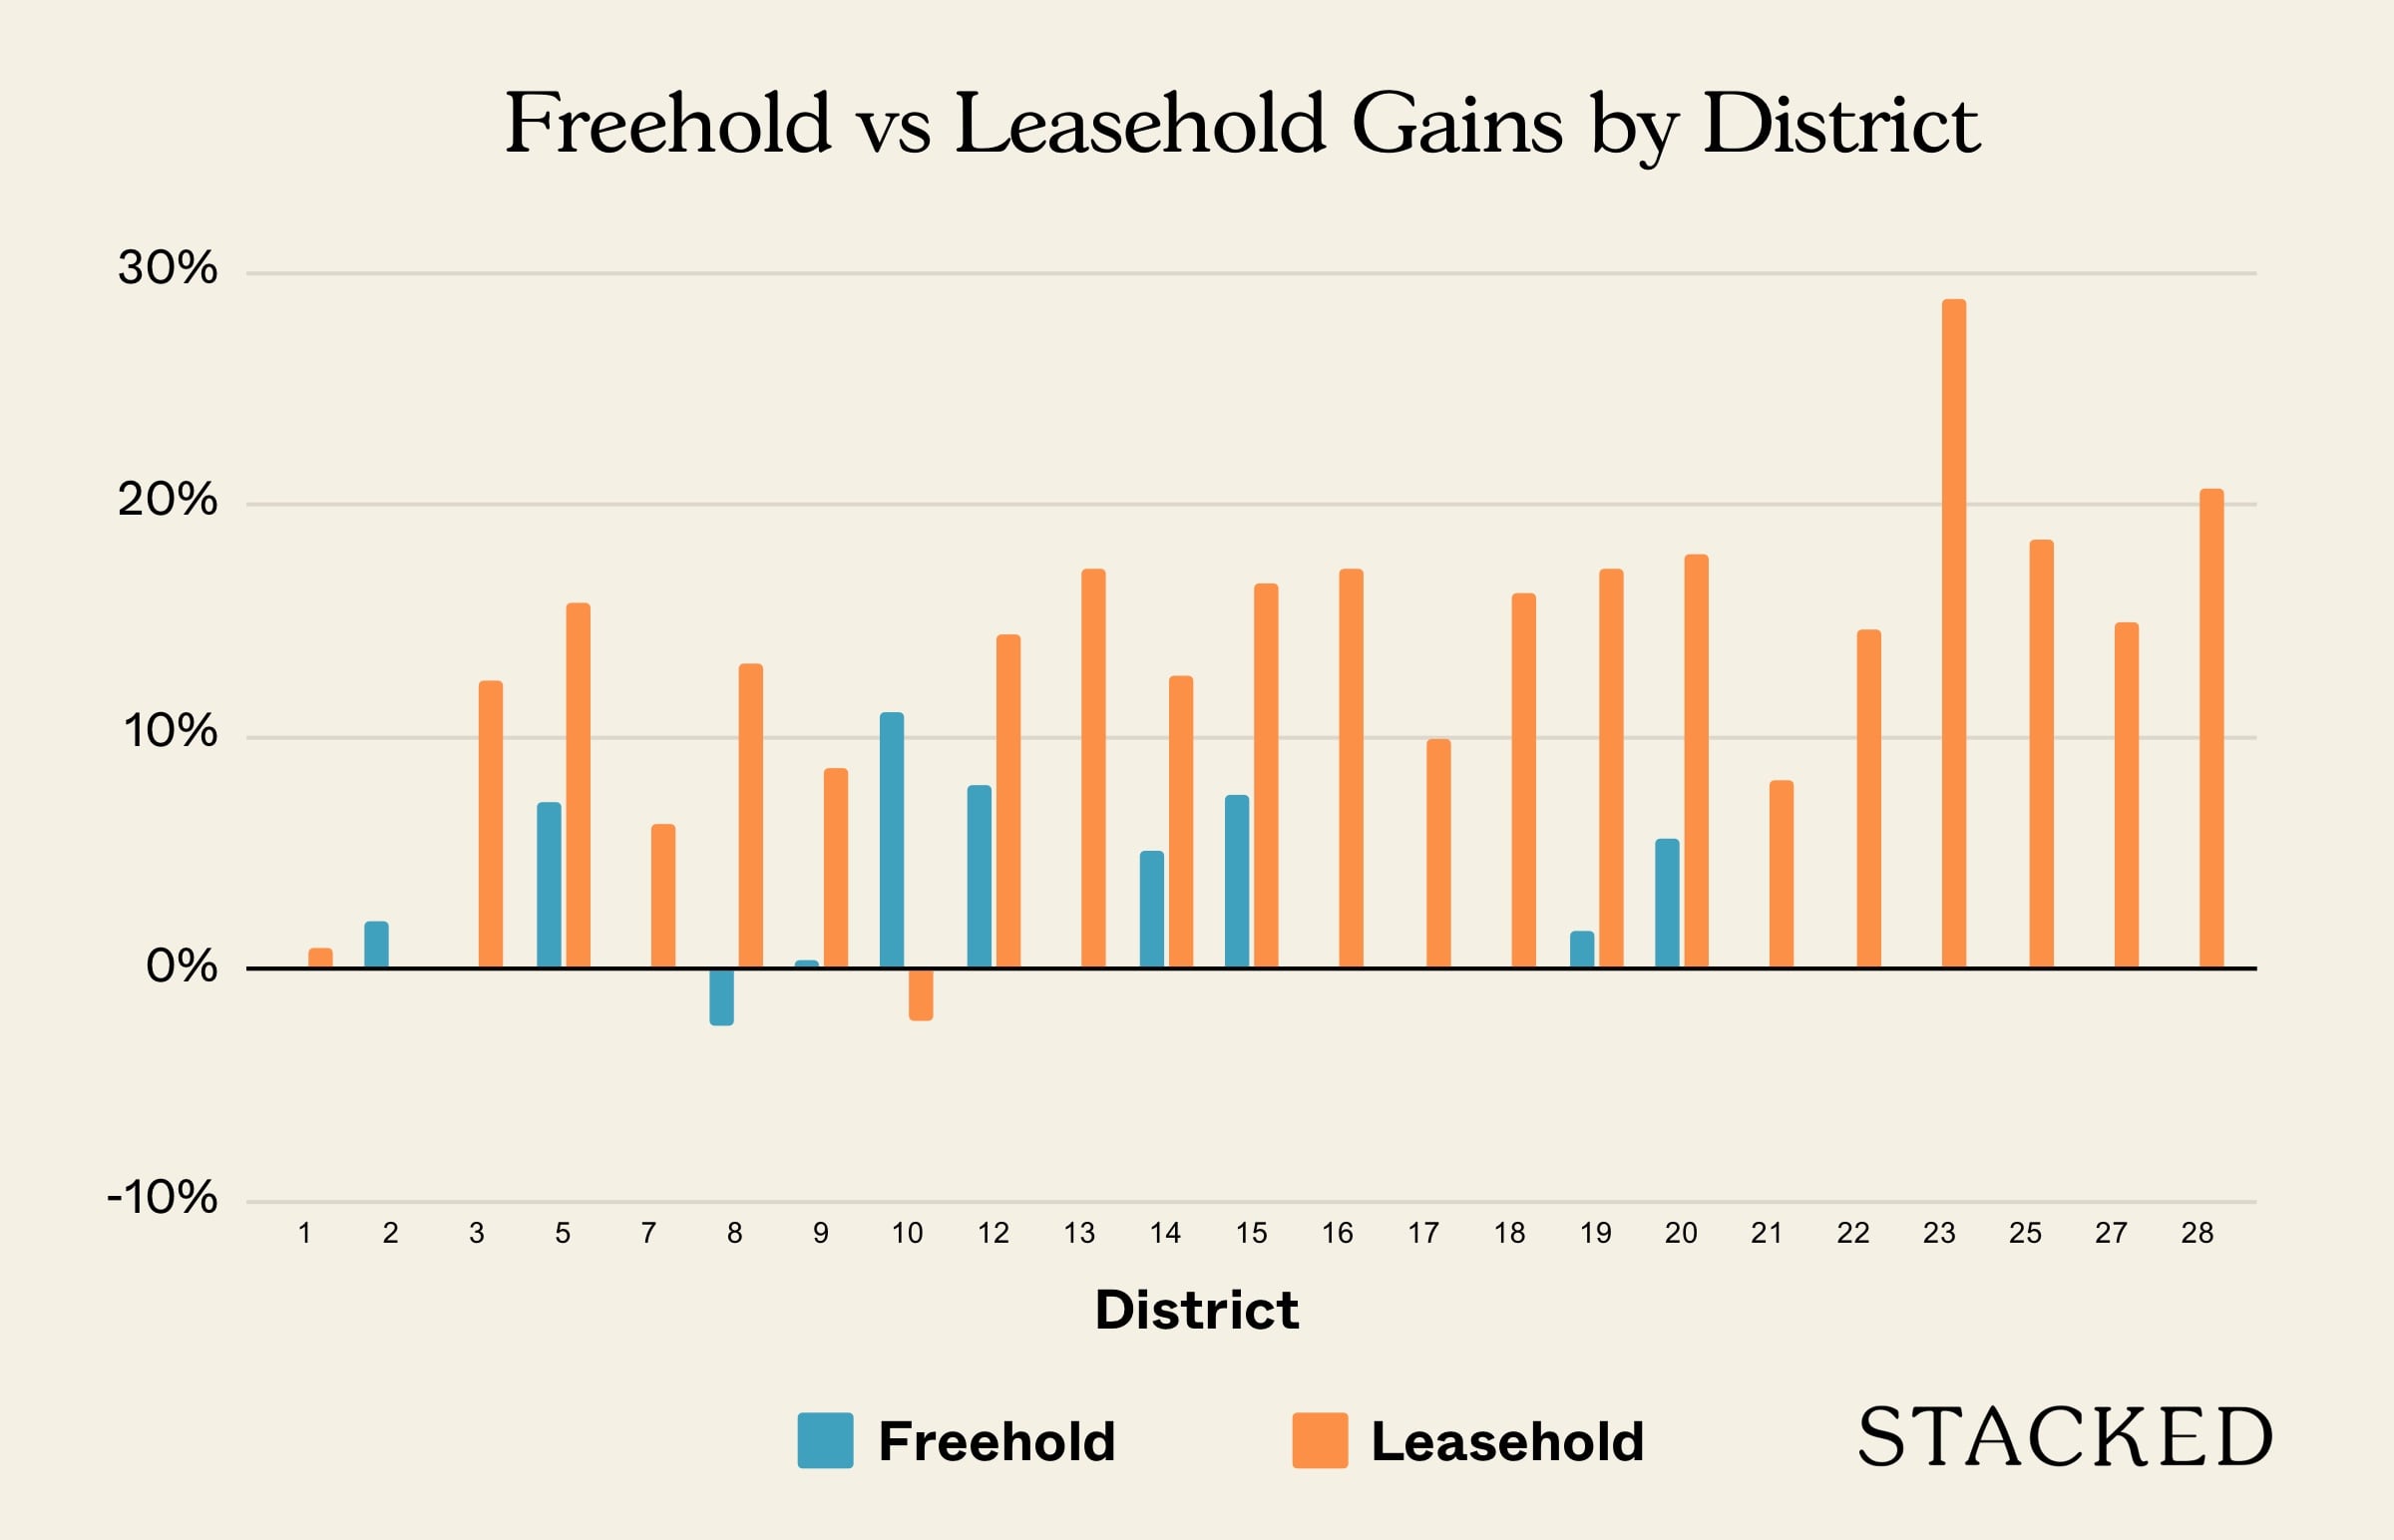 Freehold vs Leasehold Gains by District